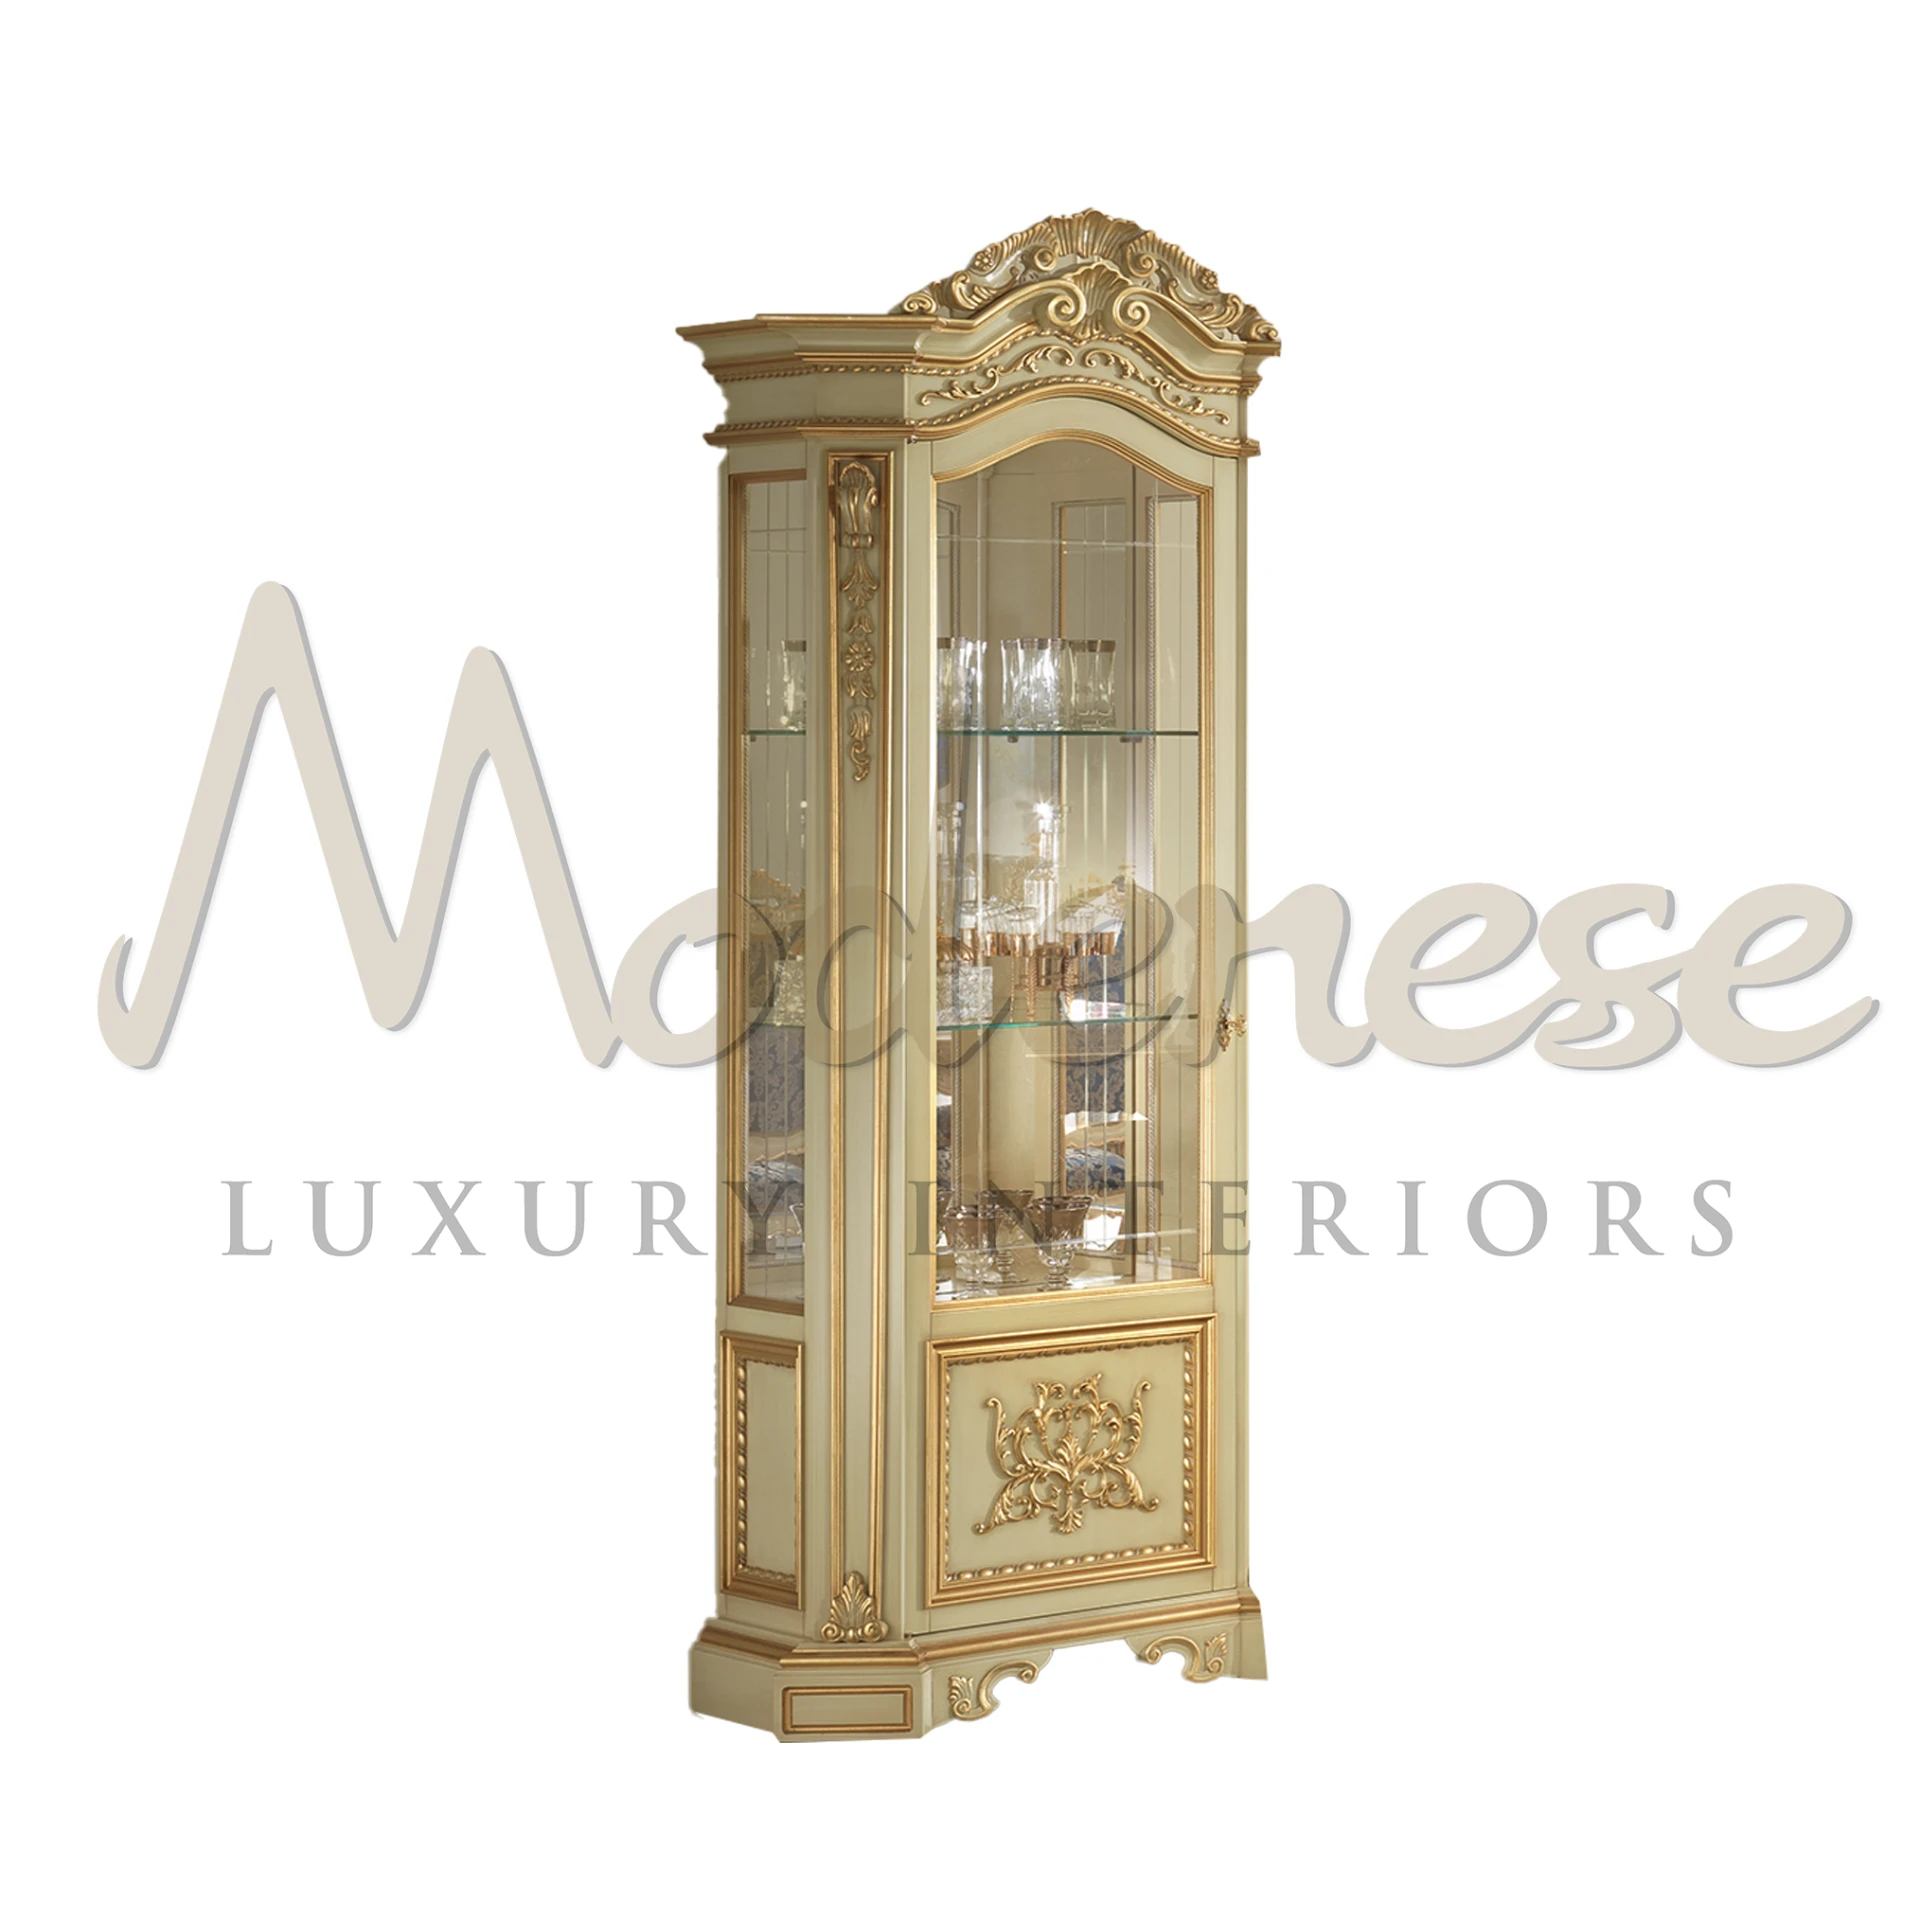 Charming ivory style one door cabinet with glass shelves and detailed trim